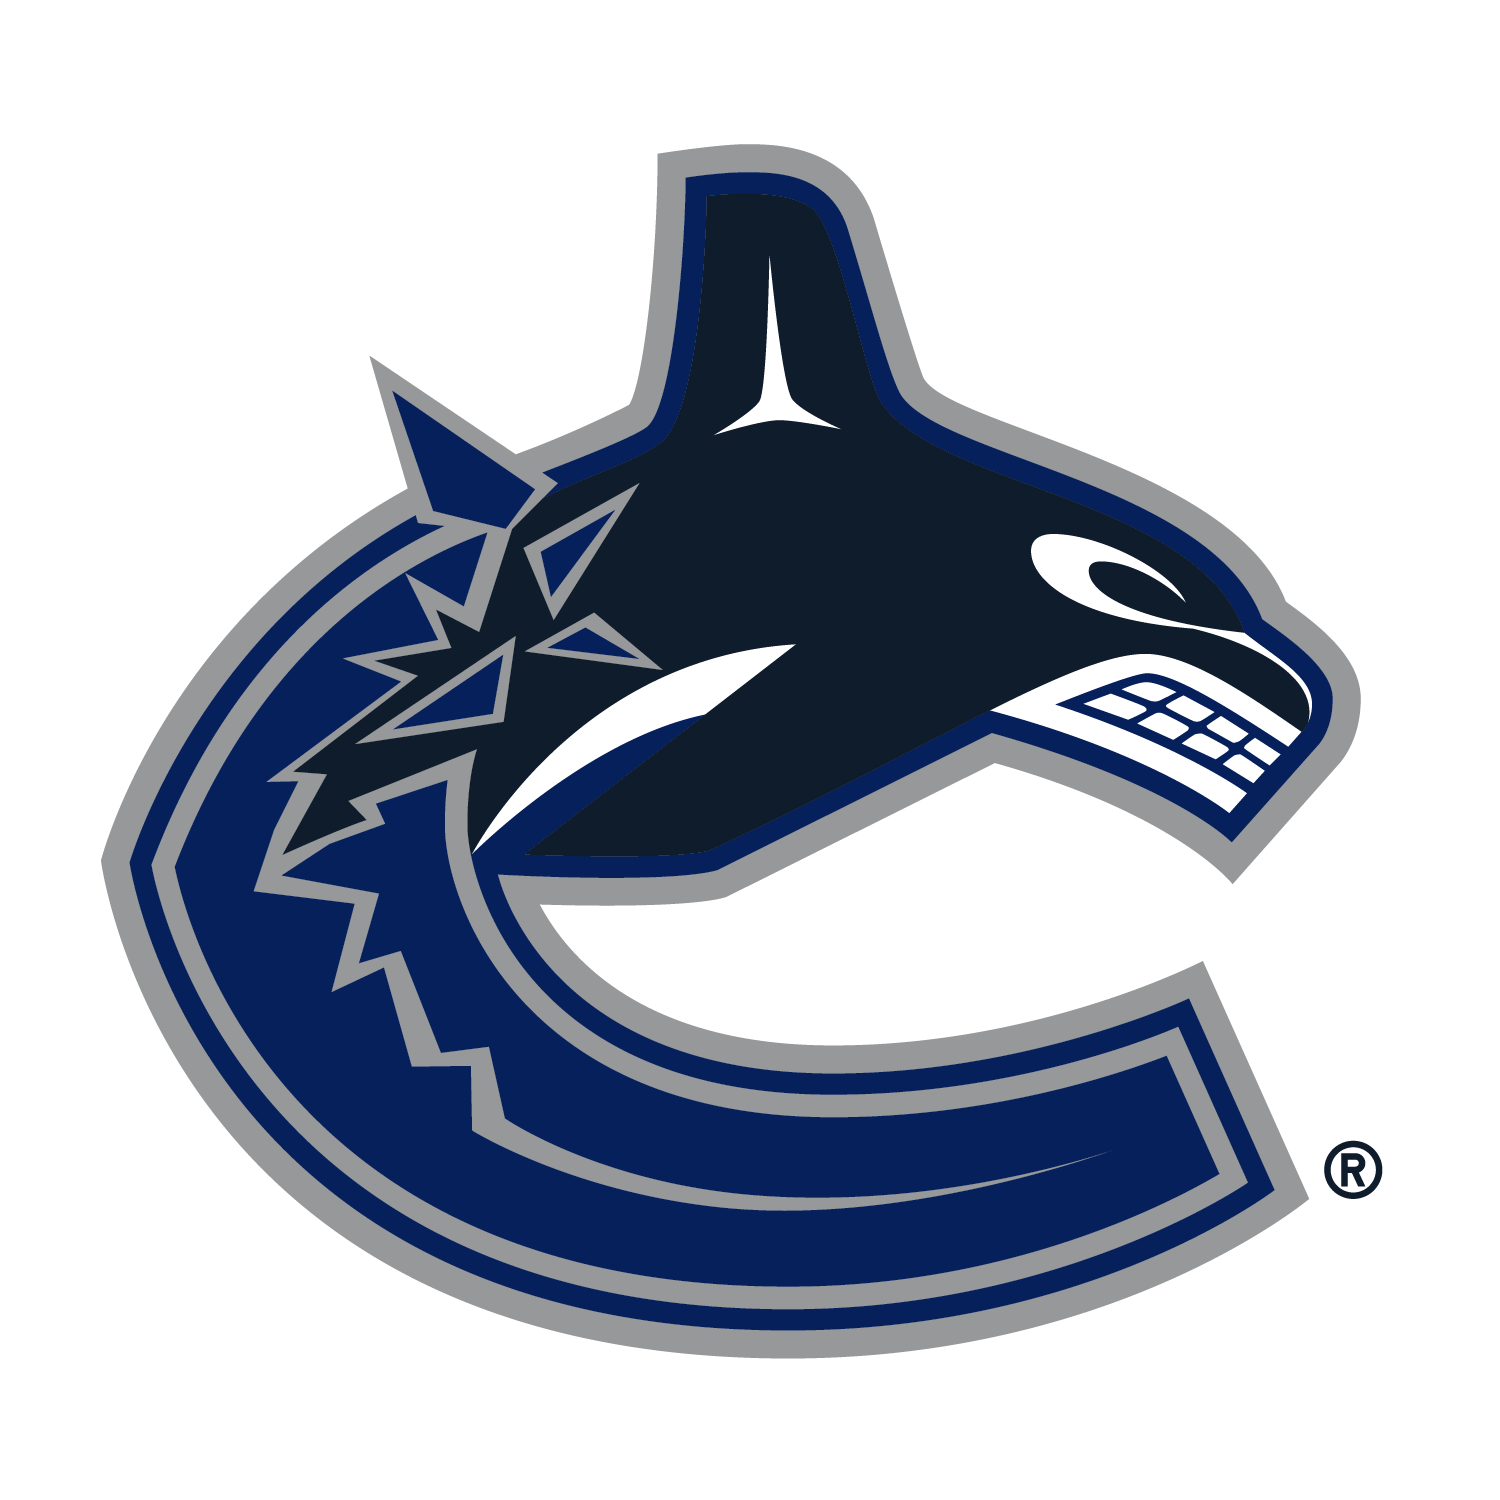 Shop Vancouver Canucks products